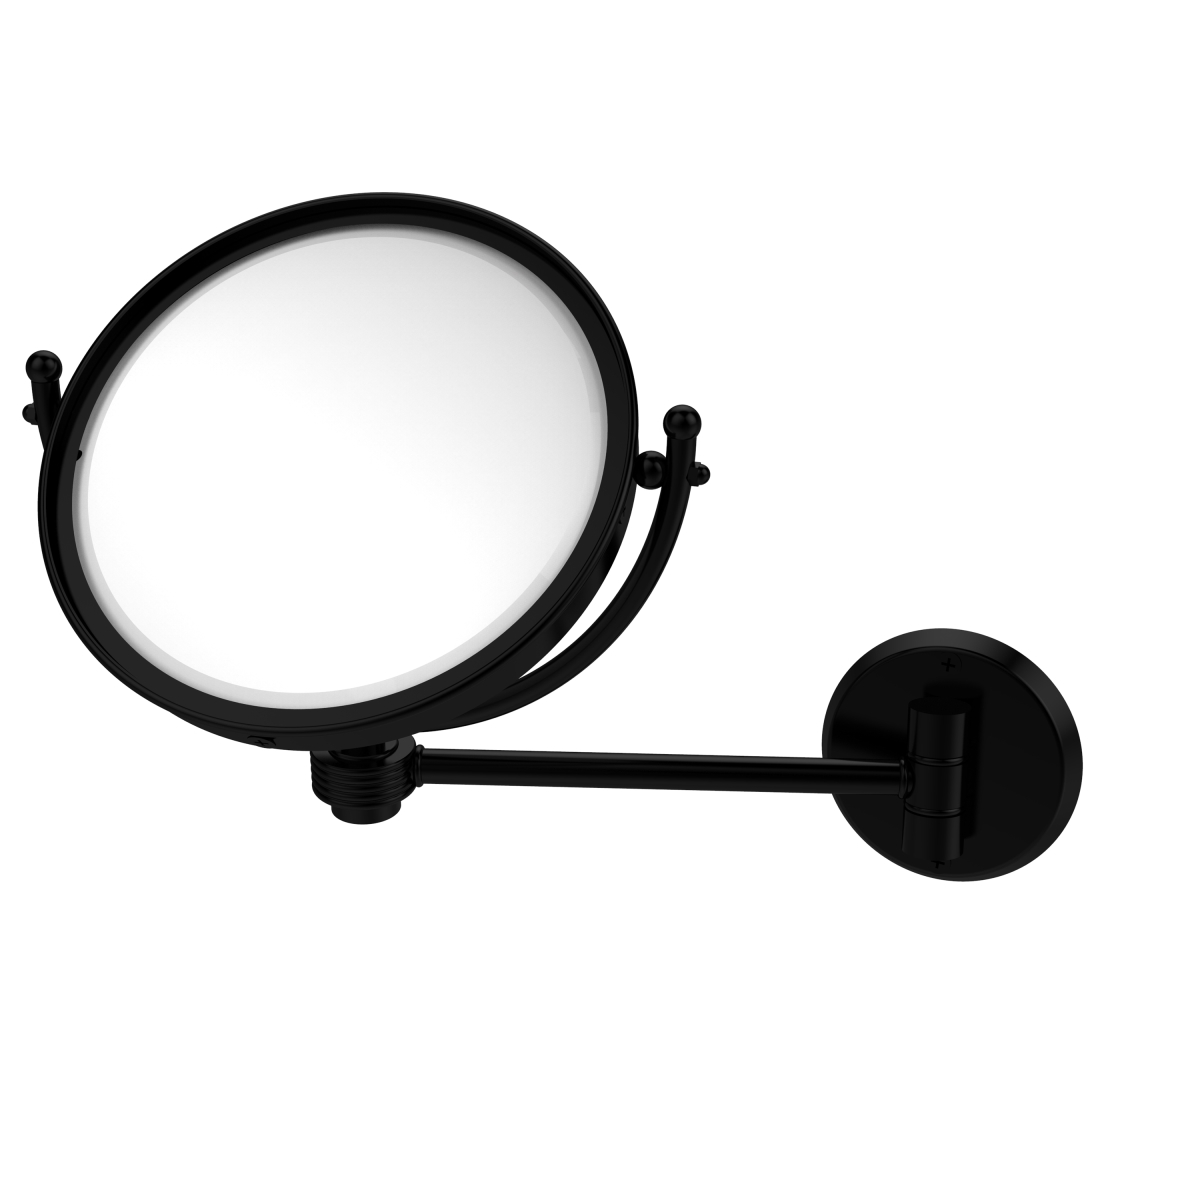 Allied Brass WM-5G-3X-BKM 8 in. Groovy Style Wall Mounted Make-Up Mirror 3X Magnification, Matte Black